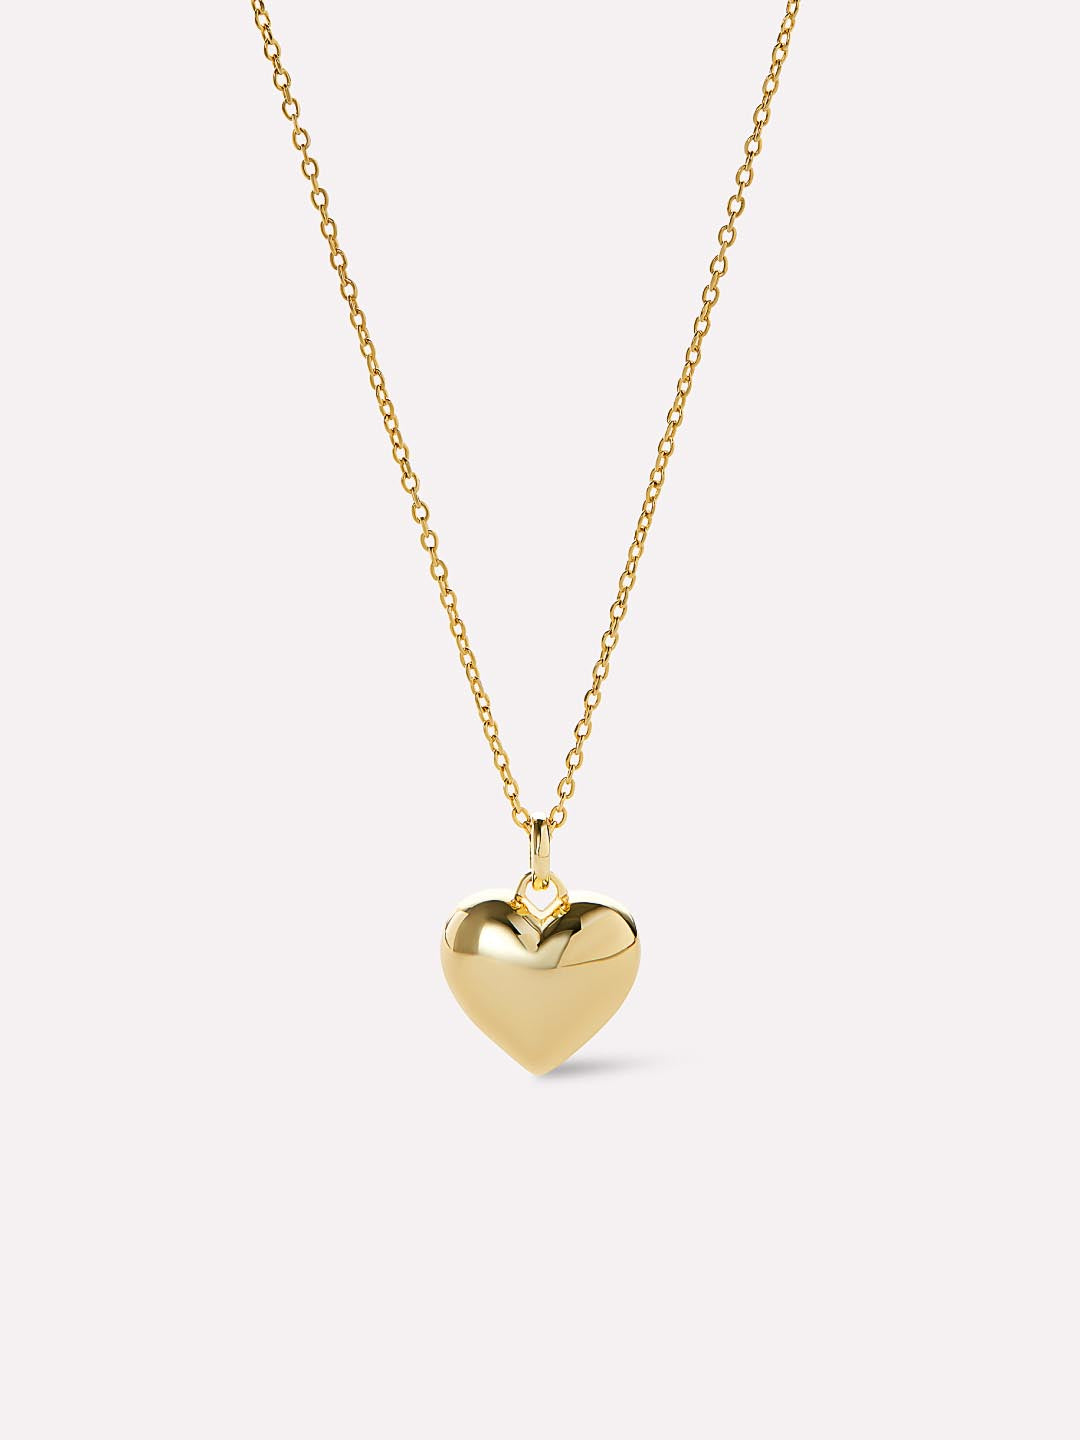 Heart Necklaces for Women 925 Silver Gold Chain Diamond Heart Pendant  Necklace Lover Clavicle Choker Valentine Jewelry Gift | Wish